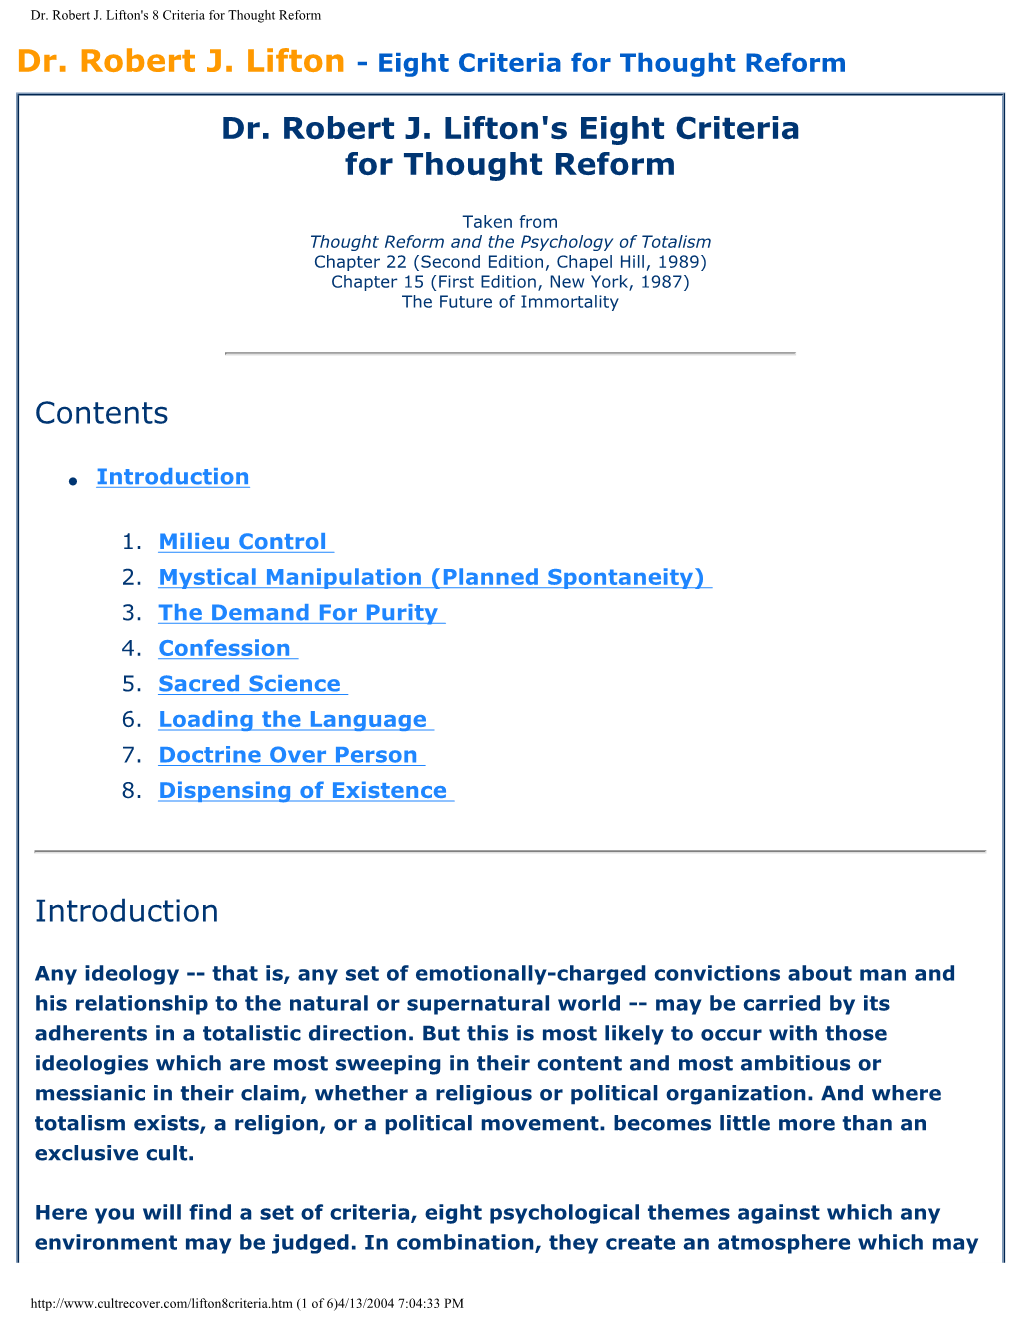 Dr. Robert J. Lifton's 8 Criteria for Thought Reform